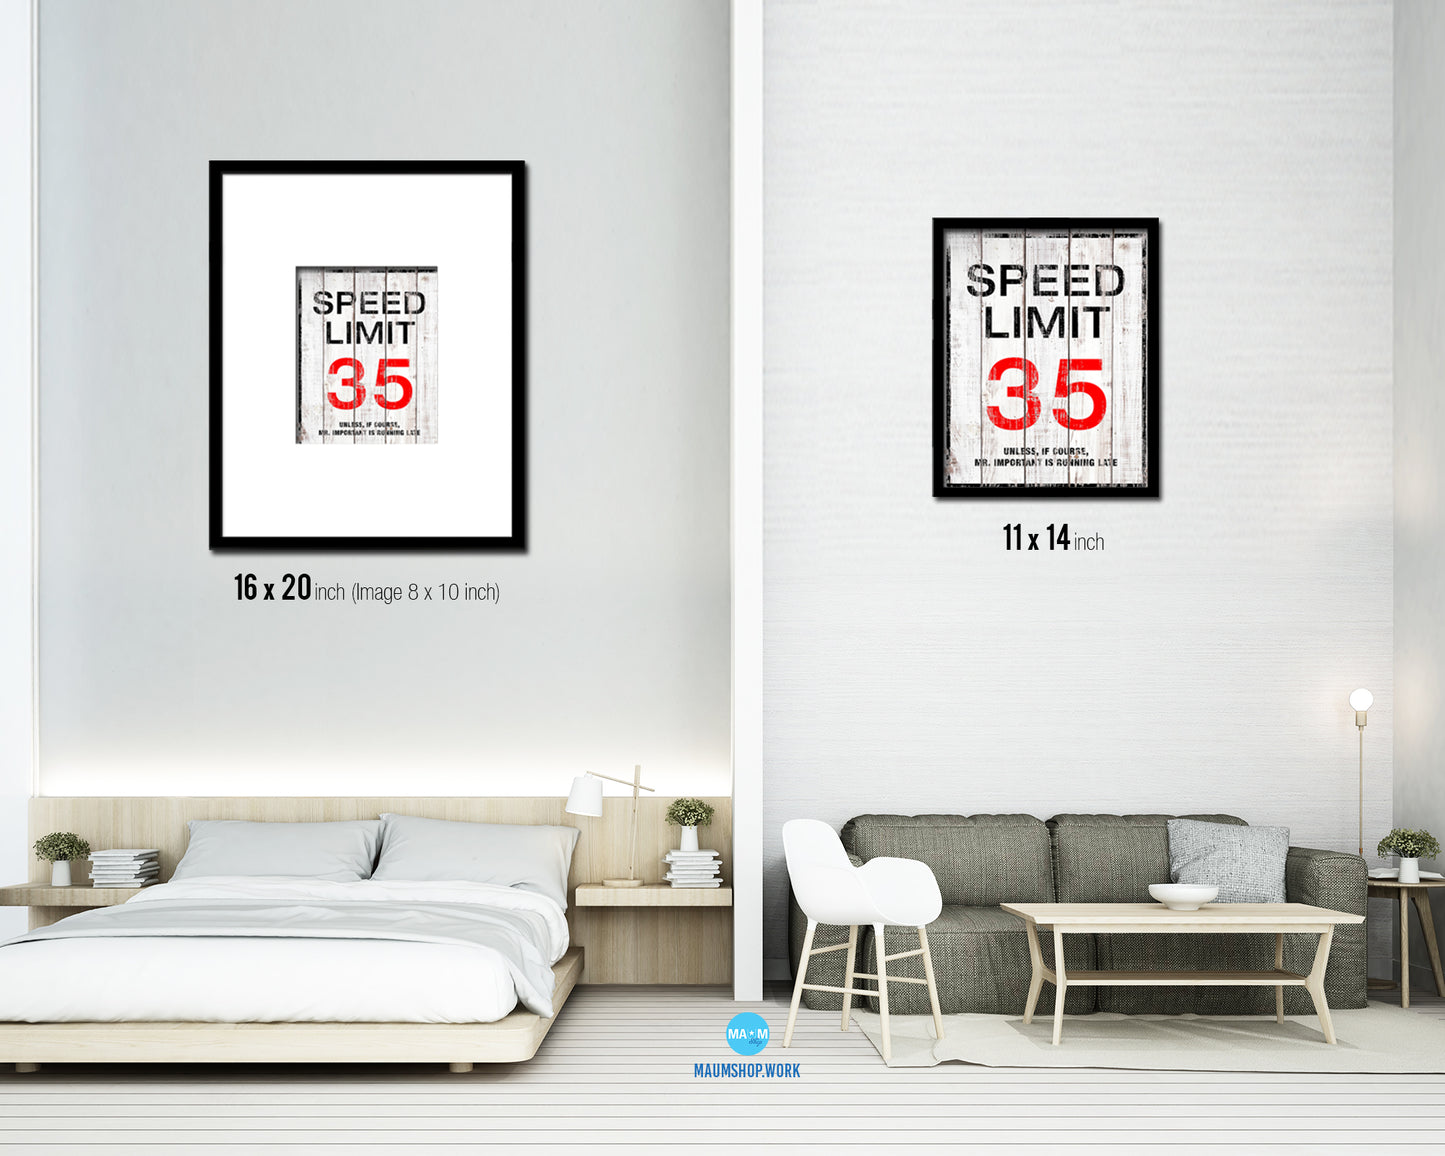 Speed limit 35 unless of course Mr important is running late Notice Danger Sign Framed Print Art